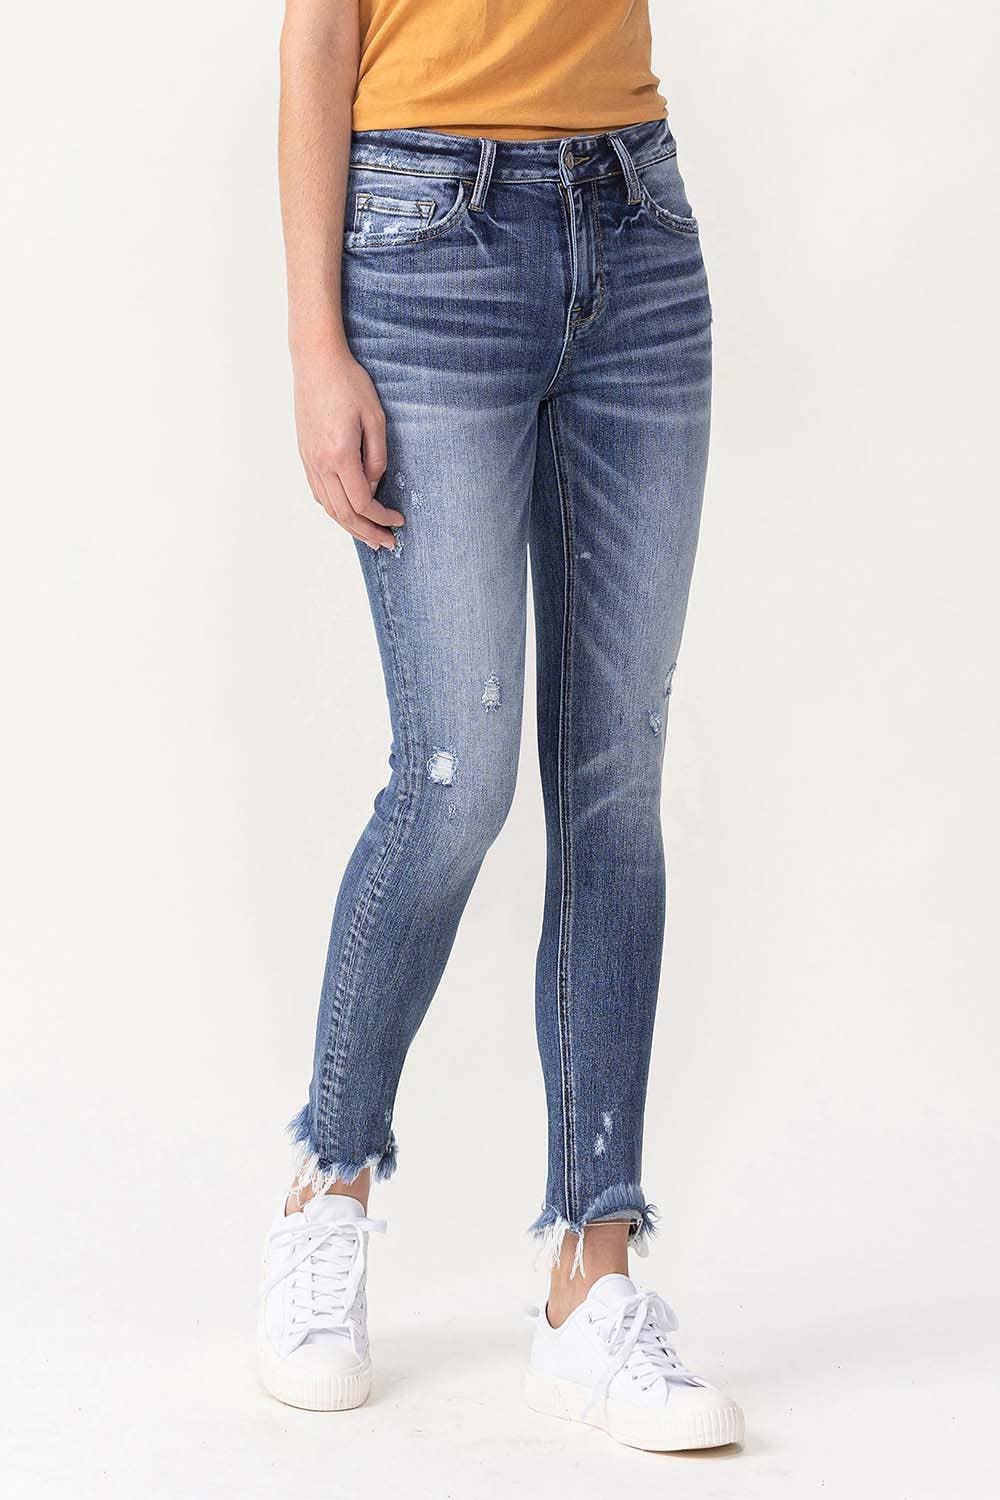 Fondly: MID RISE ANKLE SKINNY WITH FRAYED HEM